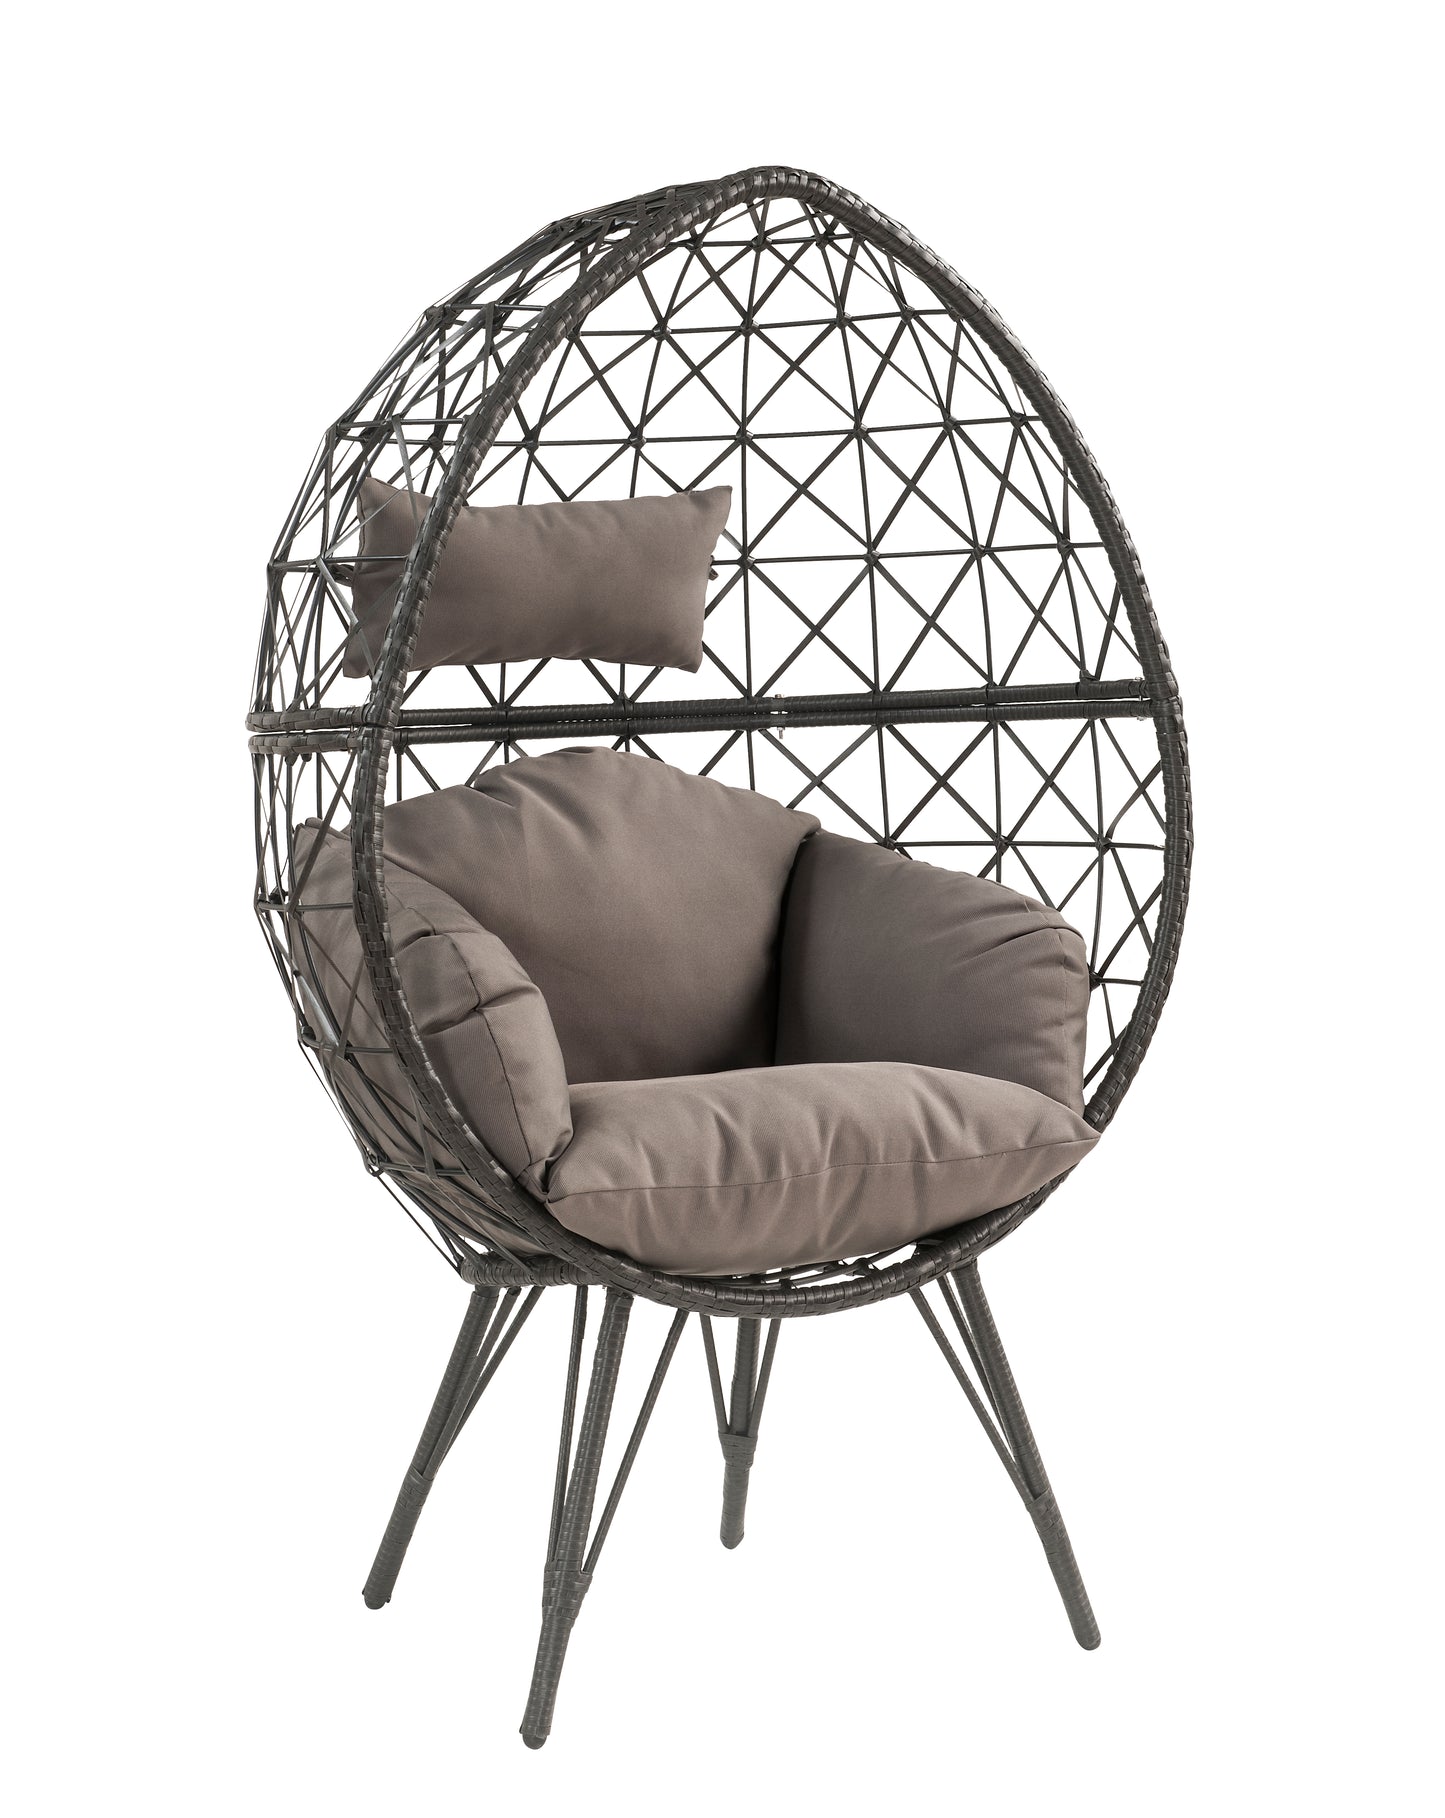 Aeven Lounge Chair